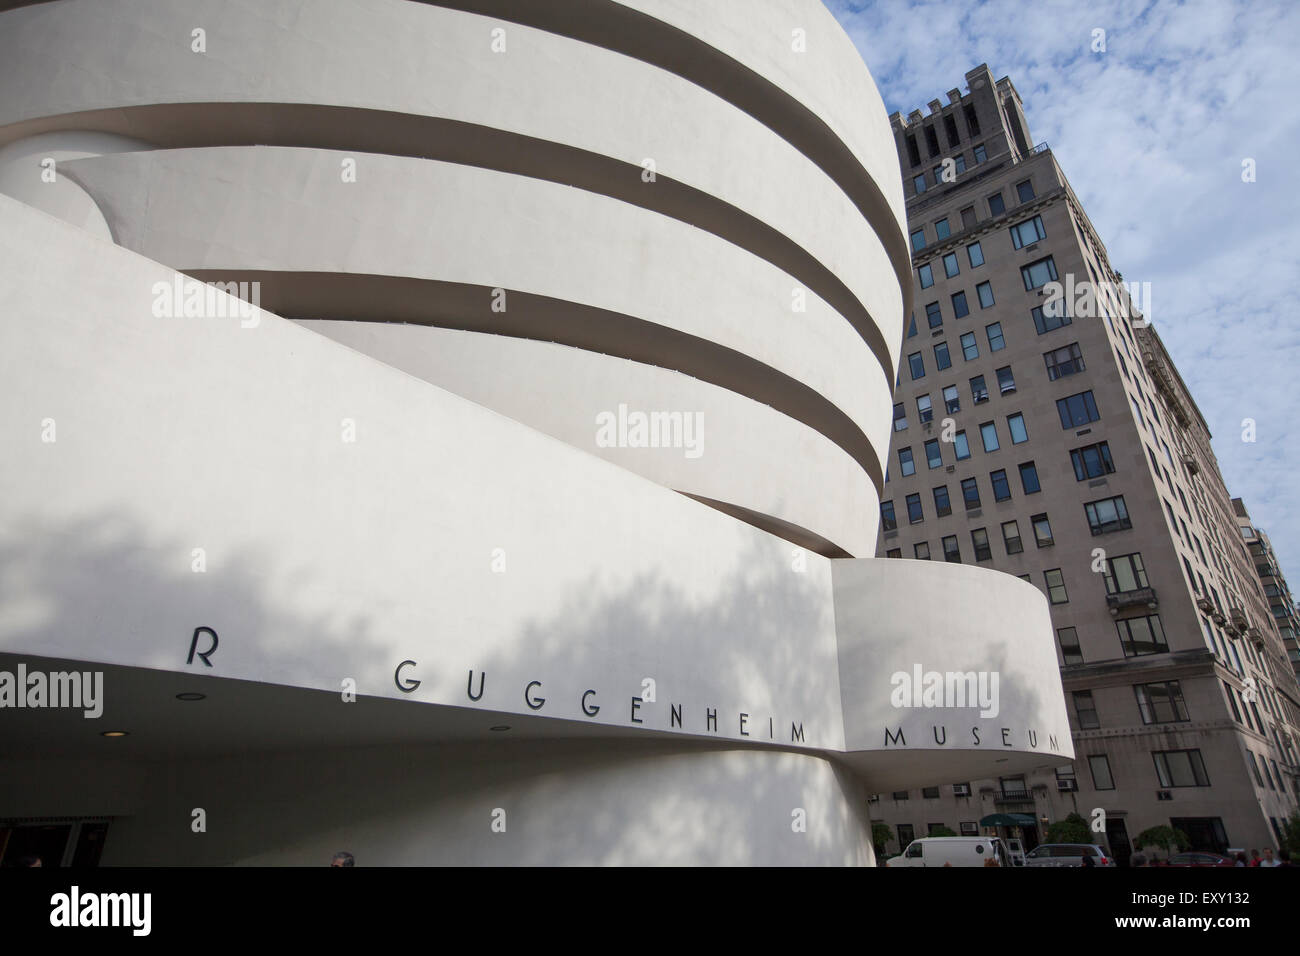 NEW YORK - May 27, 2015: The Solomon R. Guggenheim Museum, often referred to as The Guggenheim, is an art museum located at 1071 Stock Photo